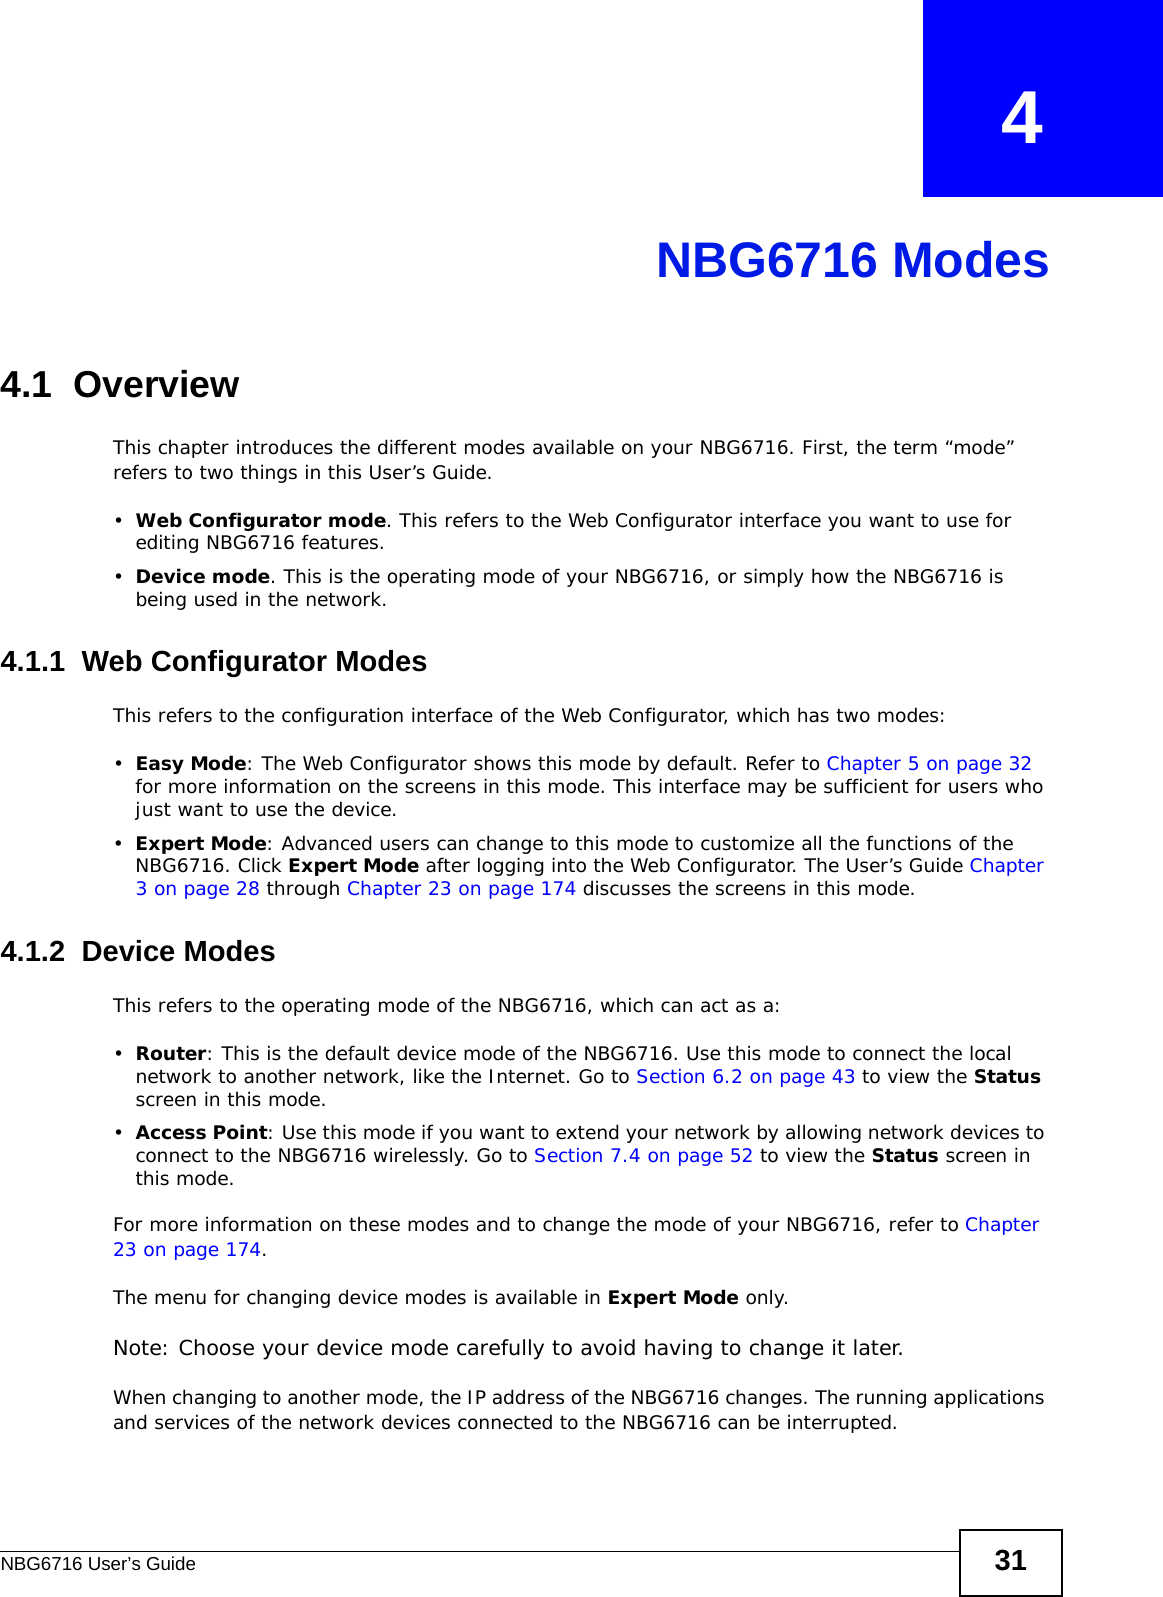 NBG6716 User’s Guide 31CHAPTER   4NBG6716 Modes4.1  OverviewThis chapter introduces the different modes available on your NBG6716. First, the term “mode” refers to two things in this User’s Guide.•Web Configurator mode. This refers to the Web Configurator interface you want to use for editing NBG6716 features. •Device mode. This is the operating mode of your NBG6716, or simply how the NBG6716 is being used in the network. 4.1.1  Web Configurator ModesThis refers to the configuration interface of the Web Configurator, which has two modes:•Easy Mode: The Web Configurator shows this mode by default. Refer to Chapter 5 on page 32 for more information on the screens in this mode. This interface may be sufficient for users who just want to use the device.•Expert Mode: Advanced users can change to this mode to customize all the functions of the NBG6716. Click Expert Mode after logging into the Web Configurator. The User’s Guide Chapter 3 on page 28 through Chapter 23 on page 174 discusses the screens in this mode.4.1.2  Device ModesThis refers to the operating mode of the NBG6716, which can act as a:•Router: This is the default device mode of the NBG6716. Use this mode to connect the local network to another network, like the Internet. Go to Section 6.2 on page 43 to view the Status screen in this mode.•Access Point: Use this mode if you want to extend your network by allowing network devices to connect to the NBG6716 wirelessly. Go to Section 7.4 on page 52 to view the Status screen in this mode.For more information on these modes and to change the mode of your NBG6716, refer to Chapter 23 on page 174.The menu for changing device modes is available in Expert Mode only. Note: Choose your device mode carefully to avoid having to change it later.When changing to another mode, the IP address of the NBG6716 changes. The running applications and services of the network devices connected to the NBG6716 can be interrupted. 